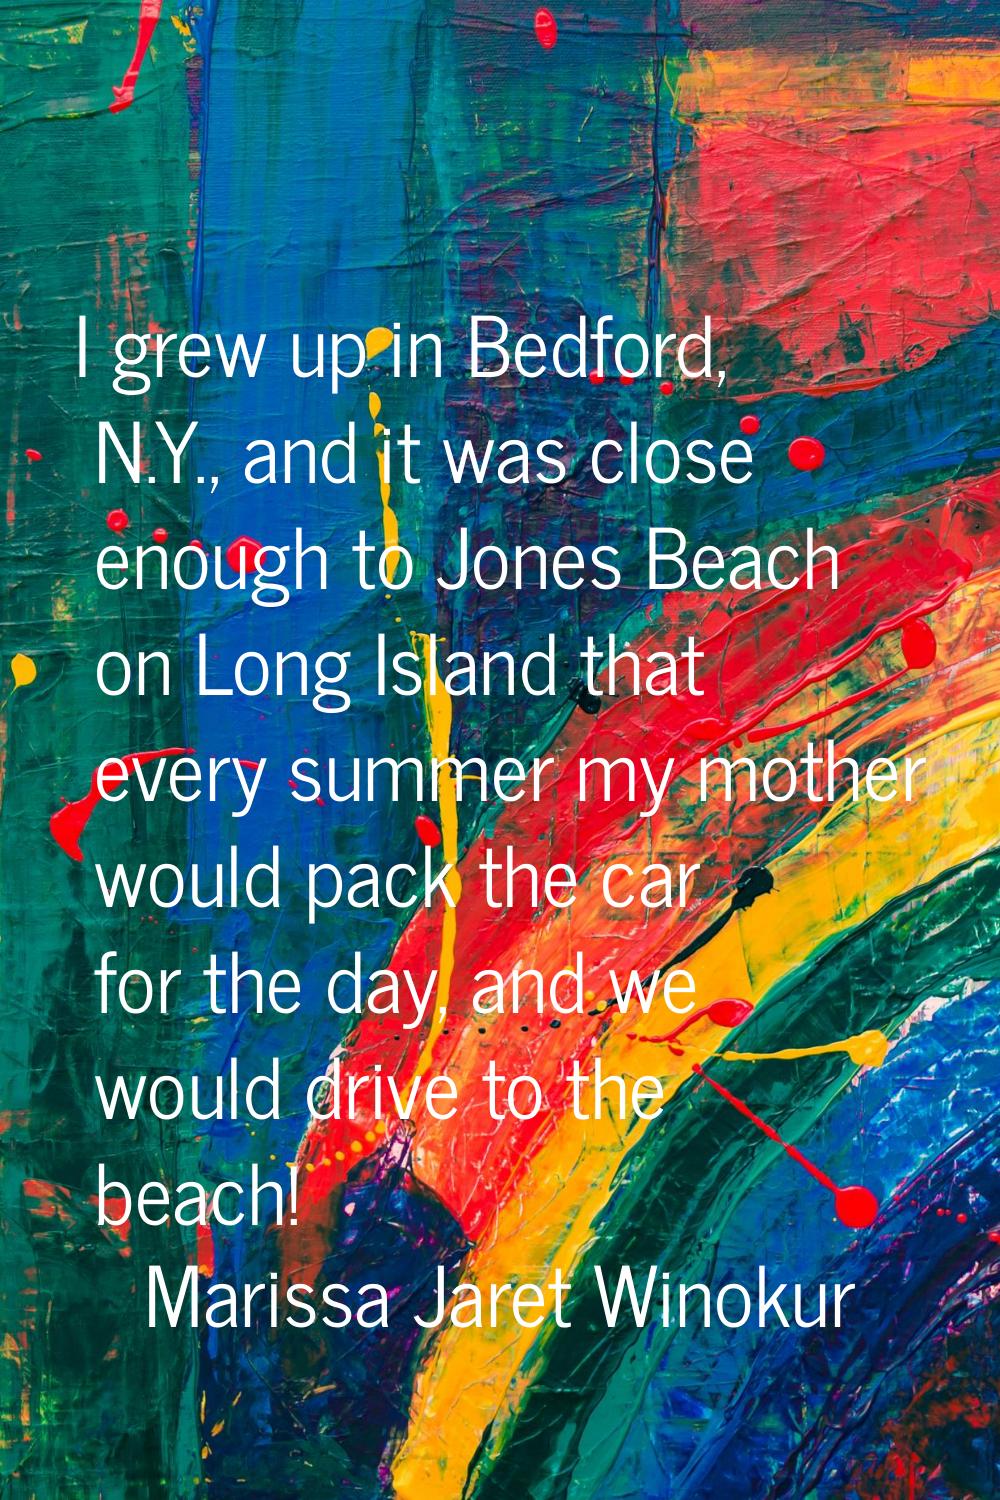 I grew up in Bedford, N.Y., and it was close enough to Jones Beach on Long Island that every summer